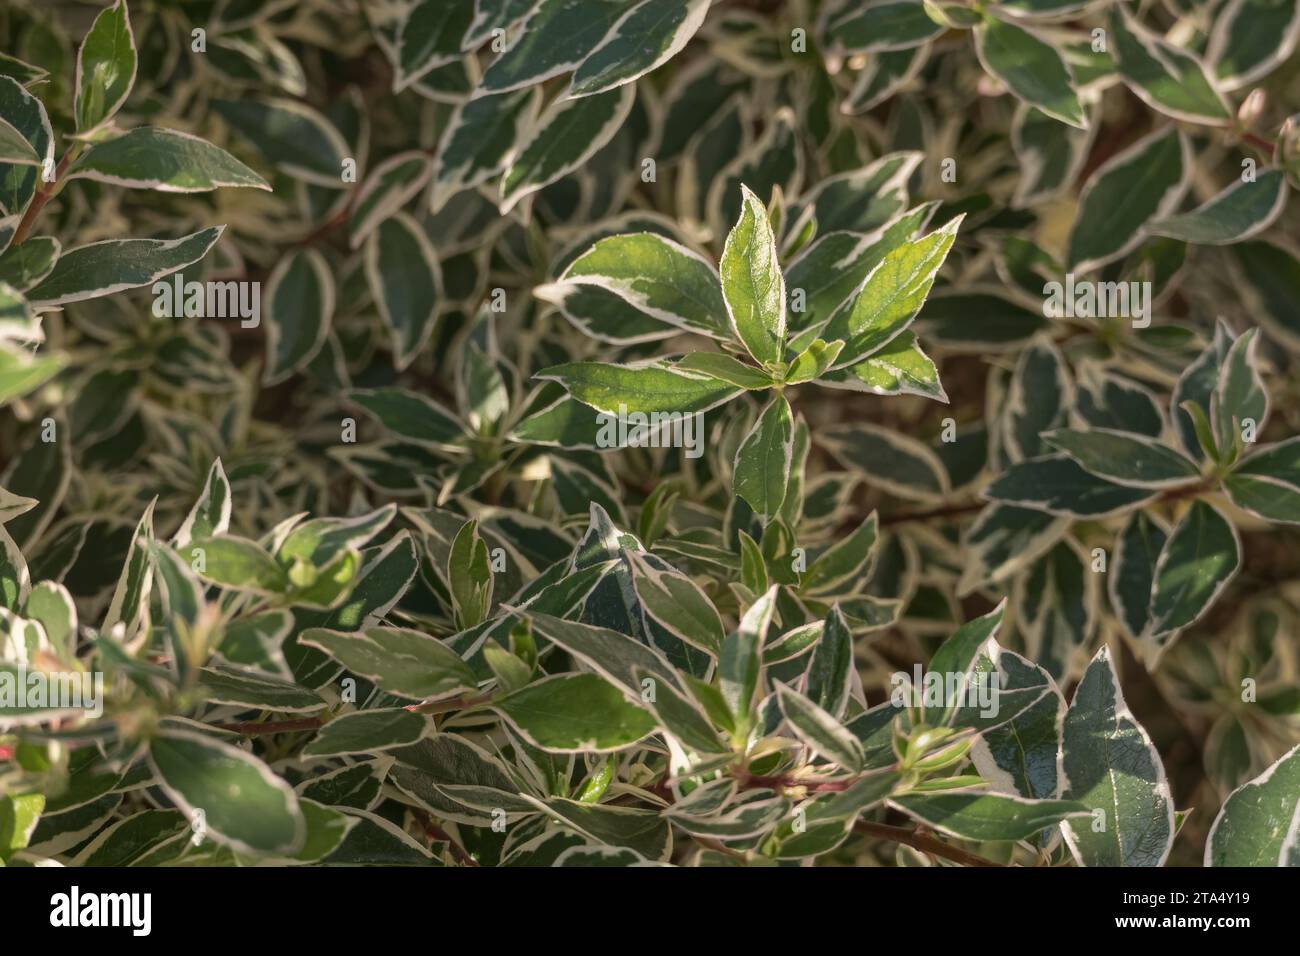 leaves of abelia plant with sunlight and shadow in the outdoor garden Stock Photo